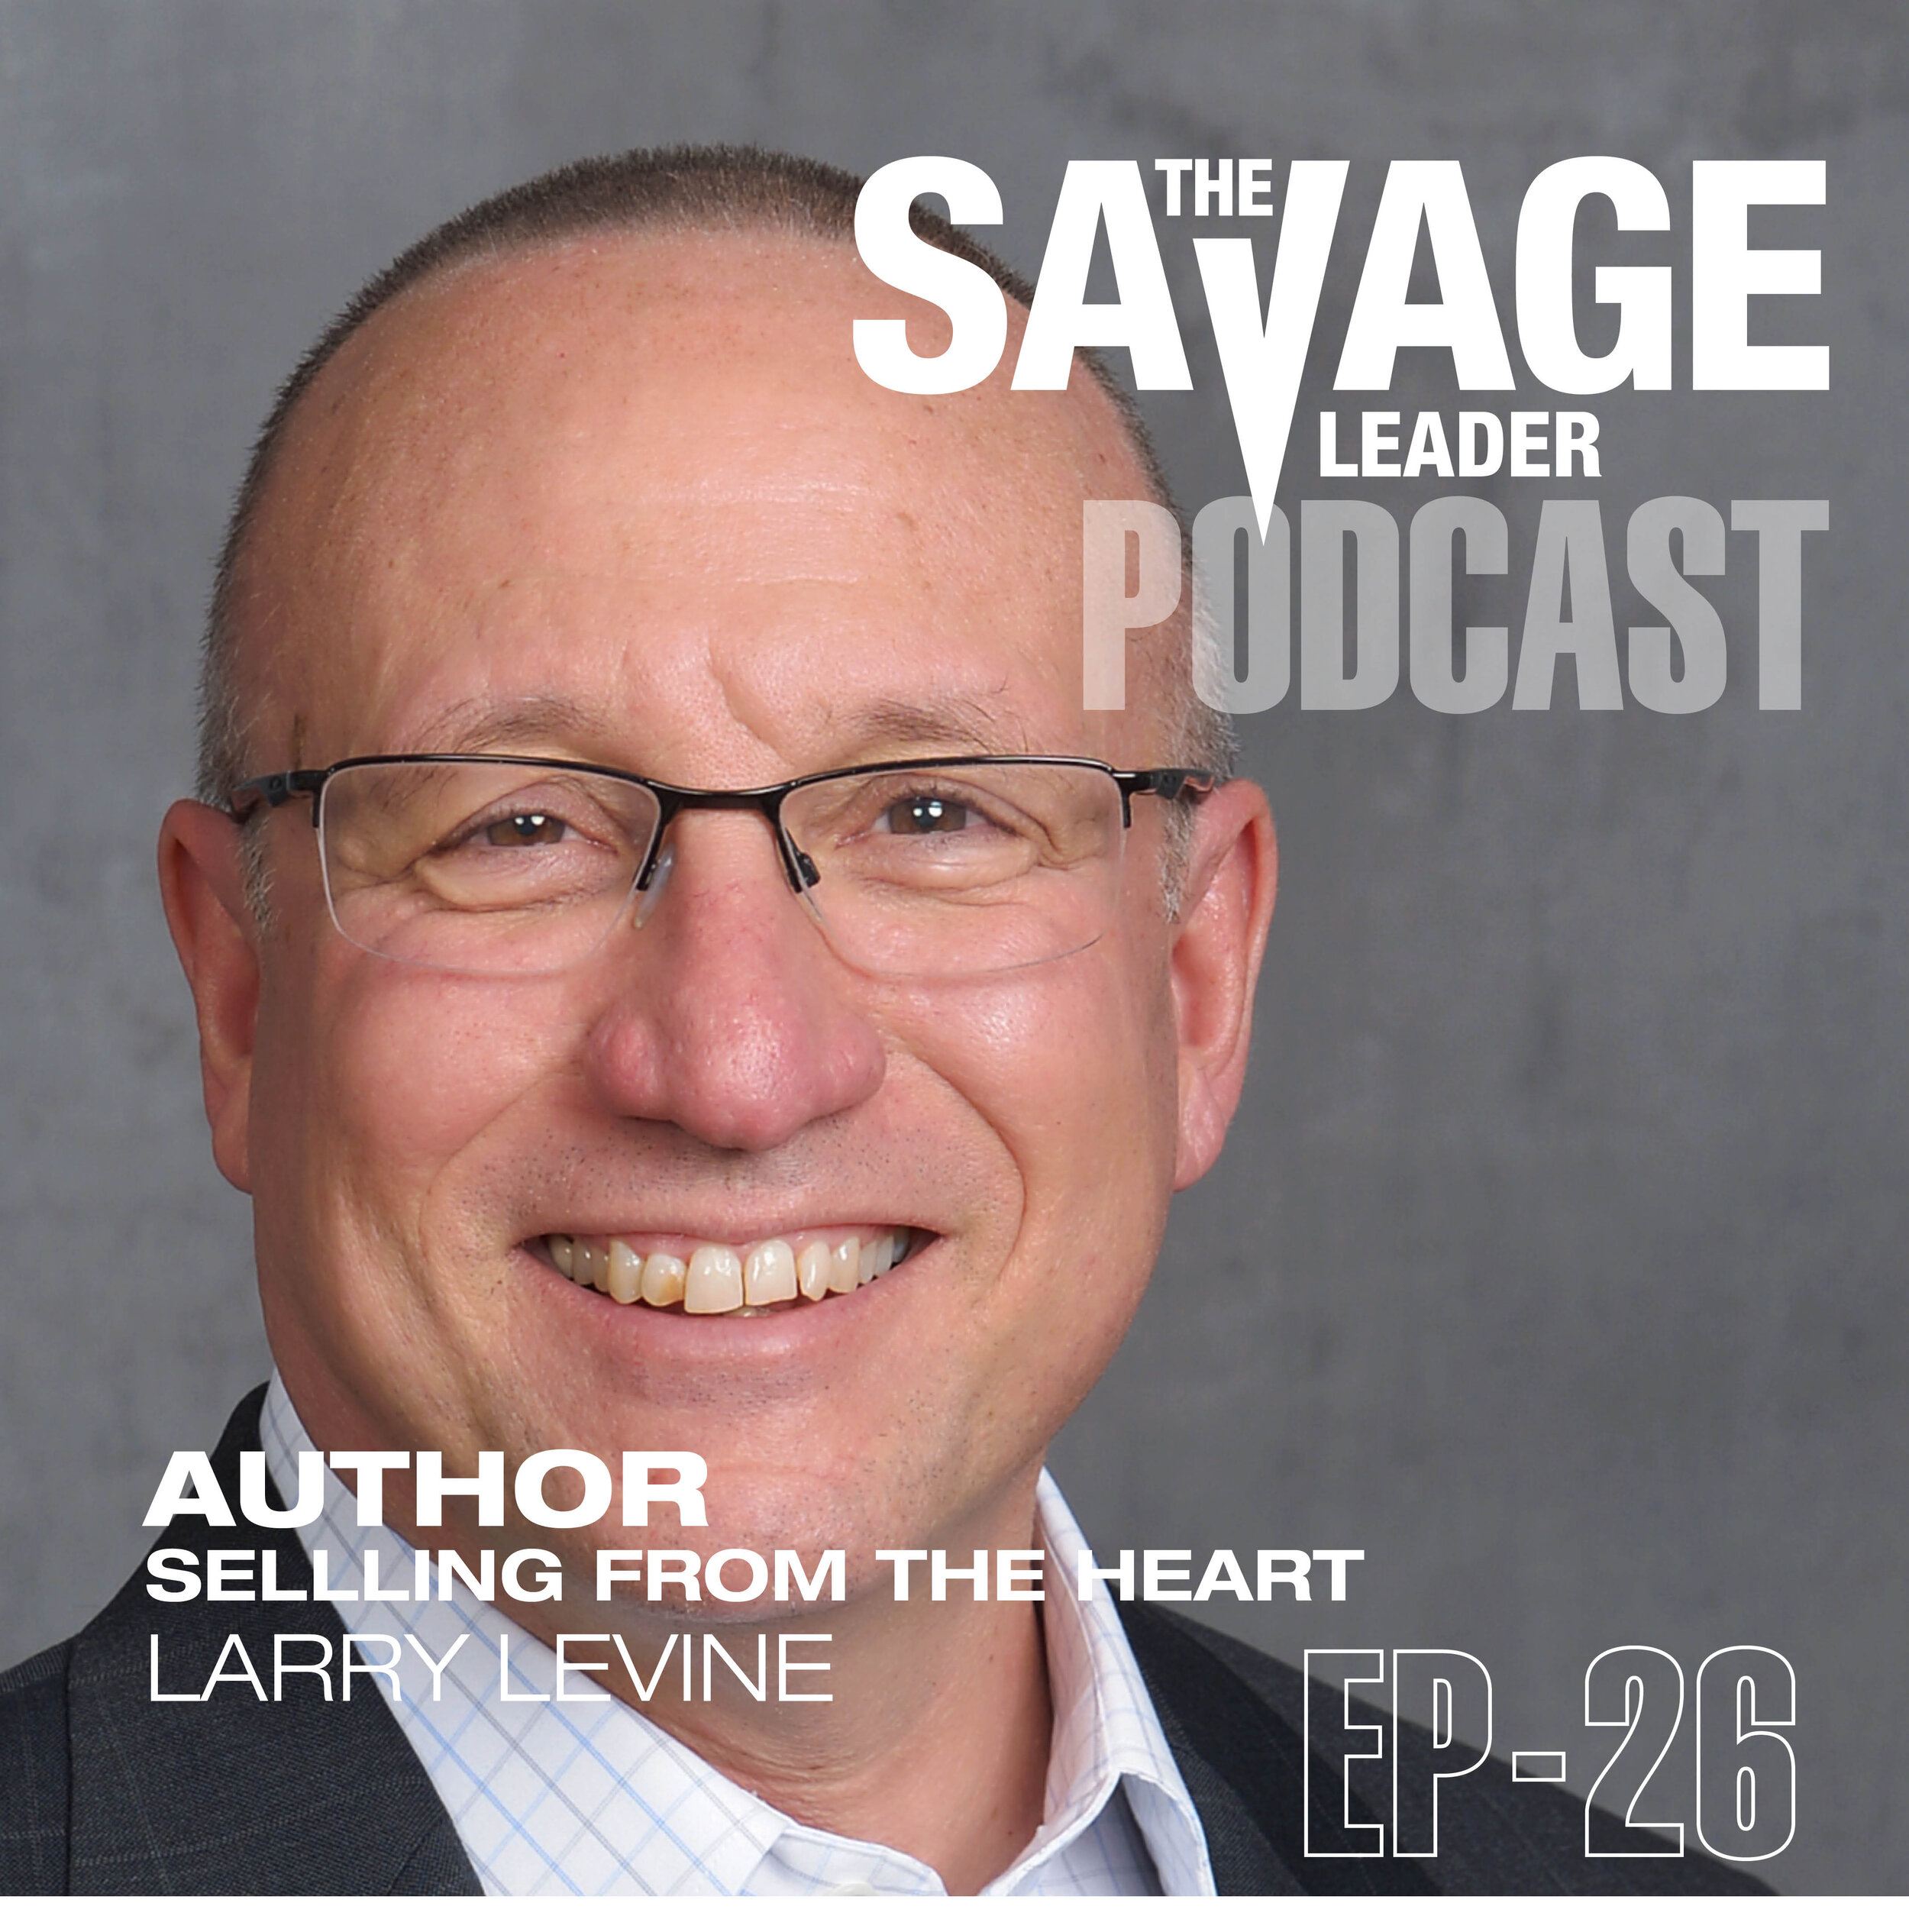 Selling From the Heart Author Larry Levine on How to Sell